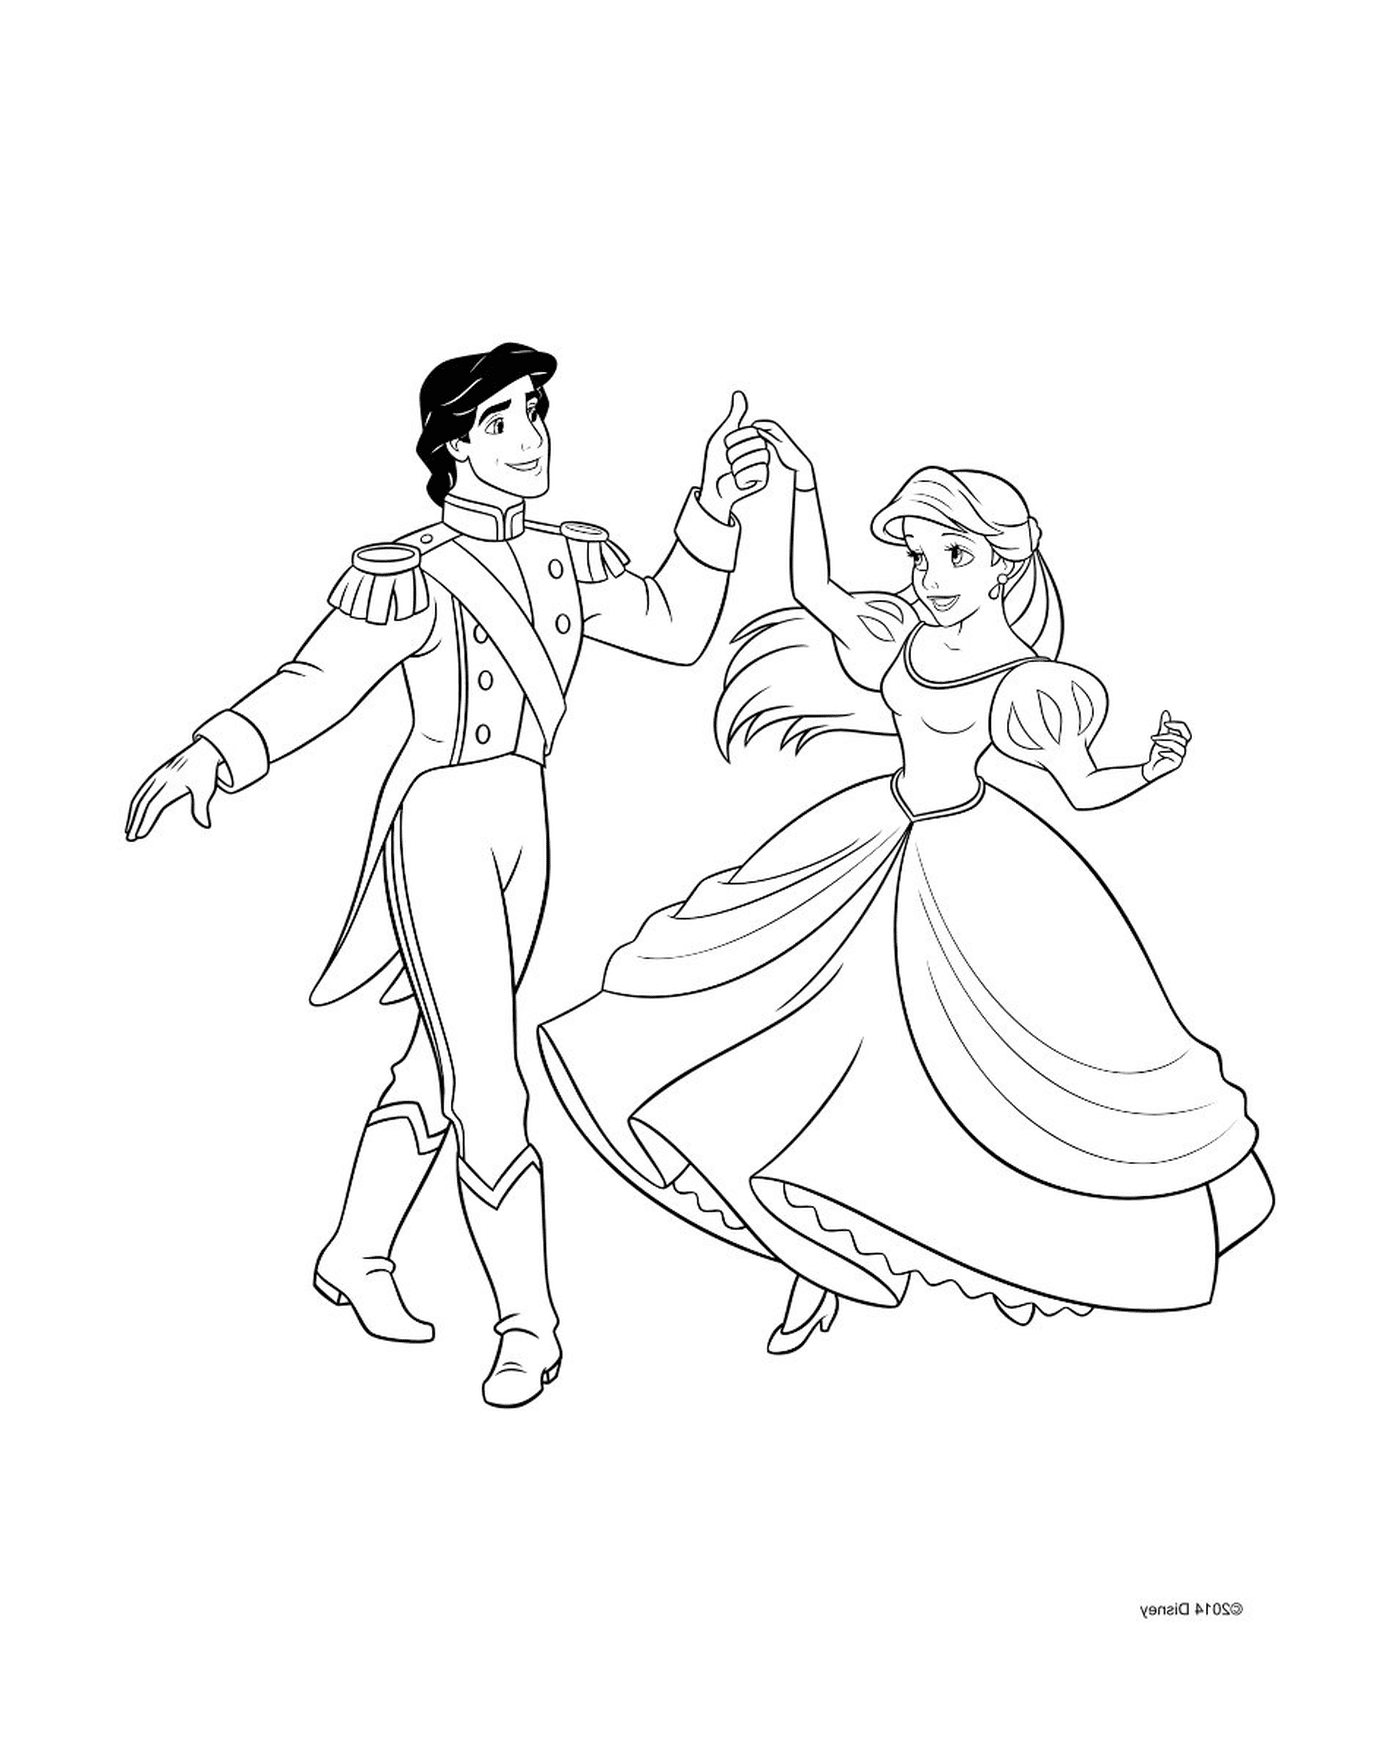  A man and a woman dancing 